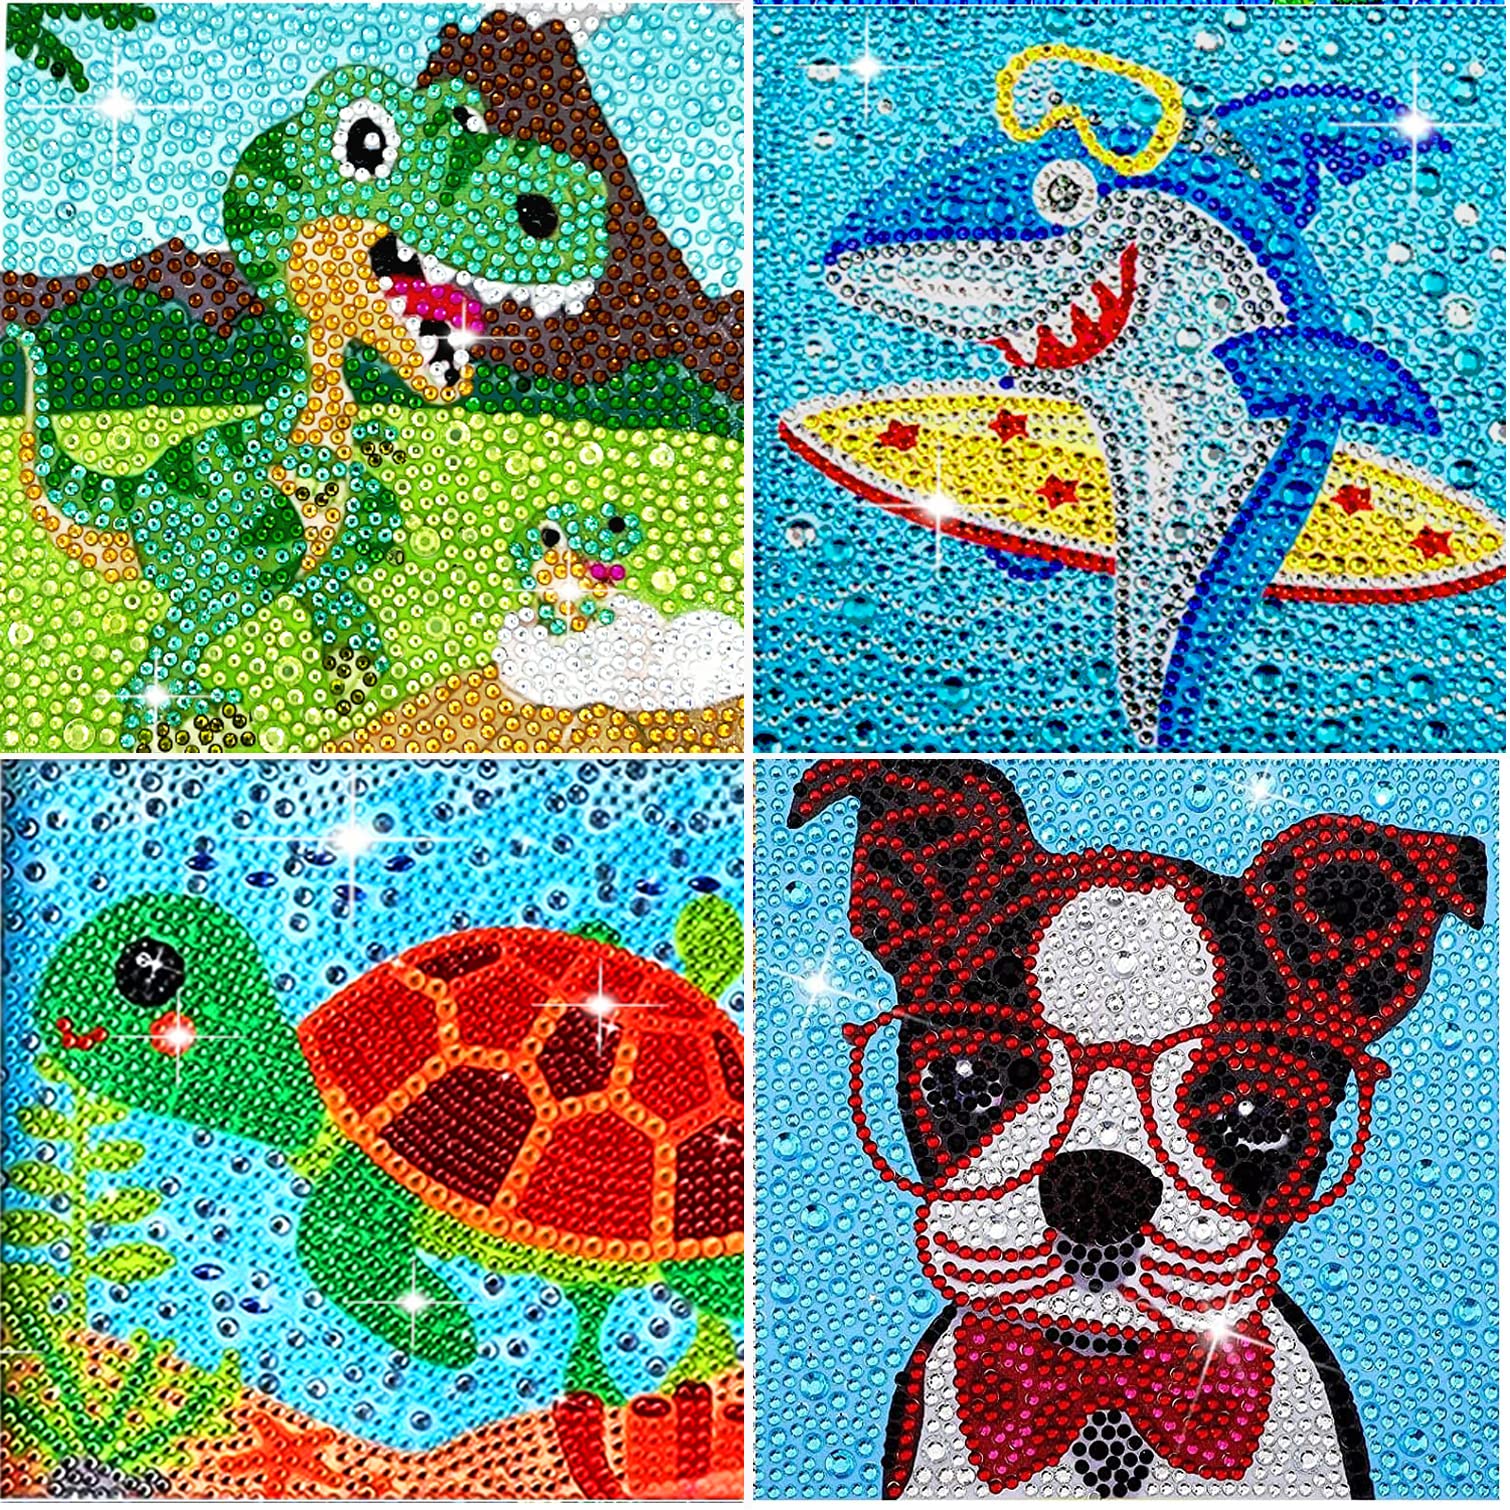 Arts and Crafts for Kids Ages 8-12 - 5D Diamond Painting Kits for